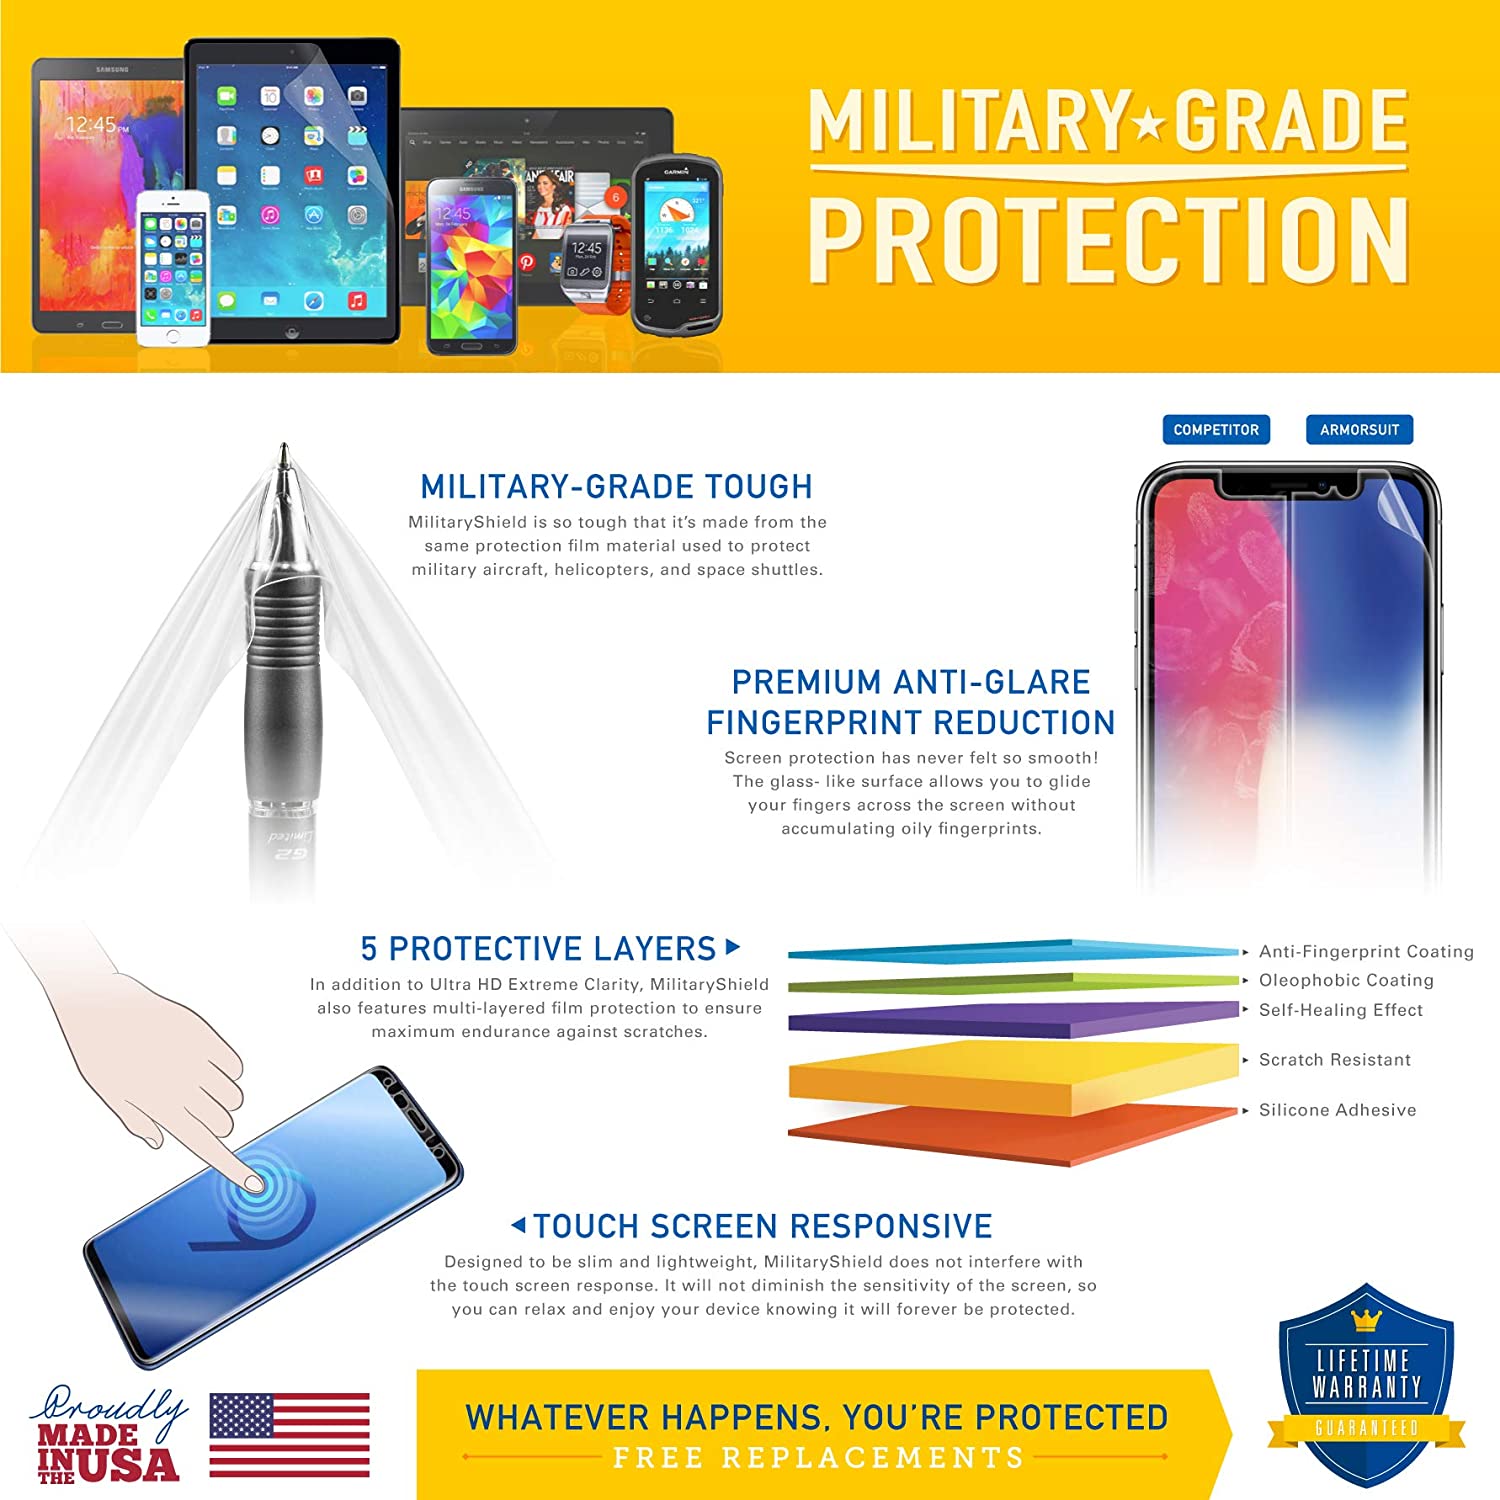 [2-Pack] Samsung Galaxy Note 7 Matte Screen Protector